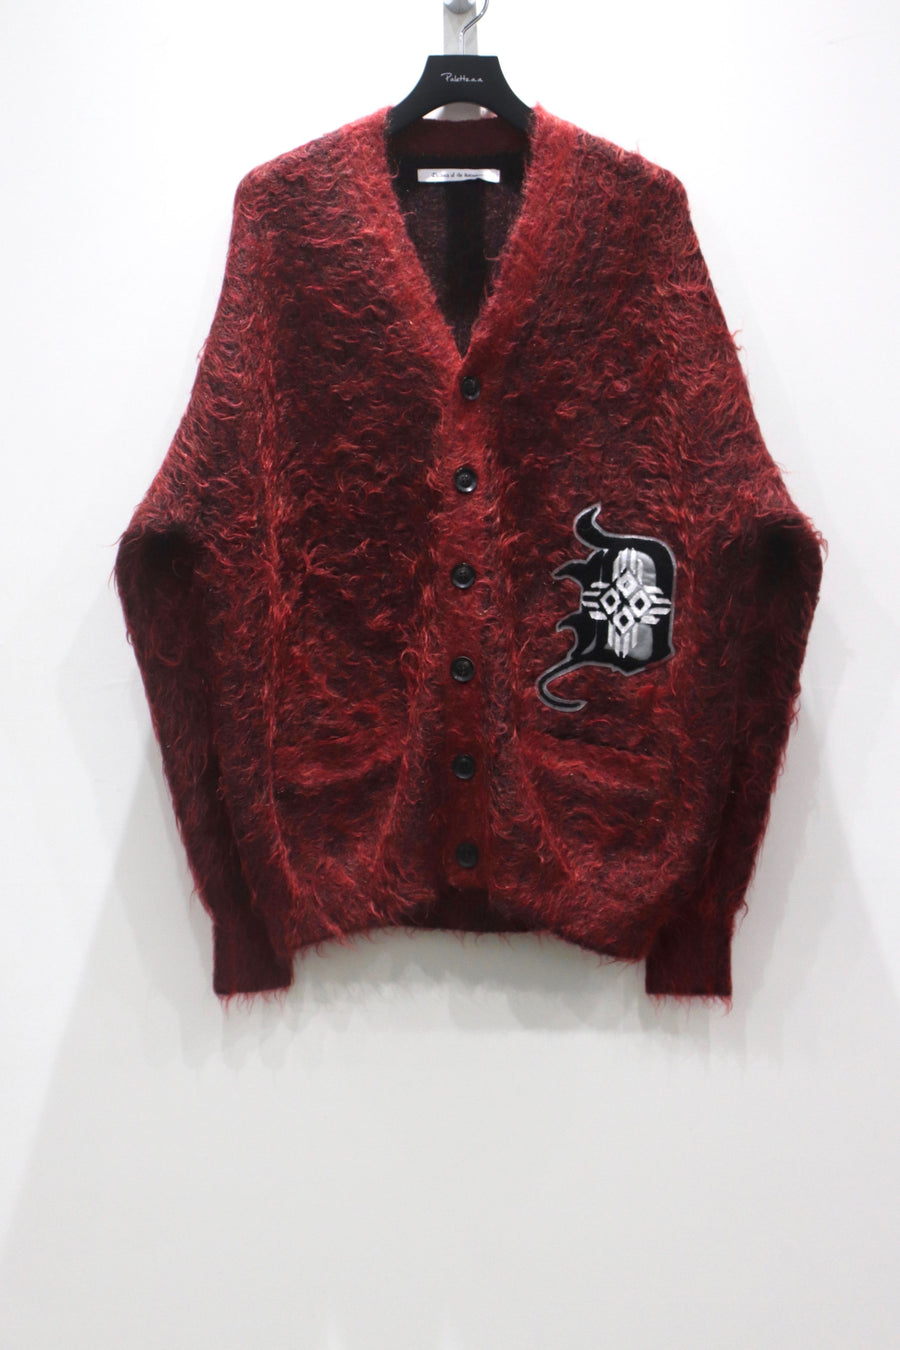 Children of the discordance  7G 2TONE CARDIGAN(RED)